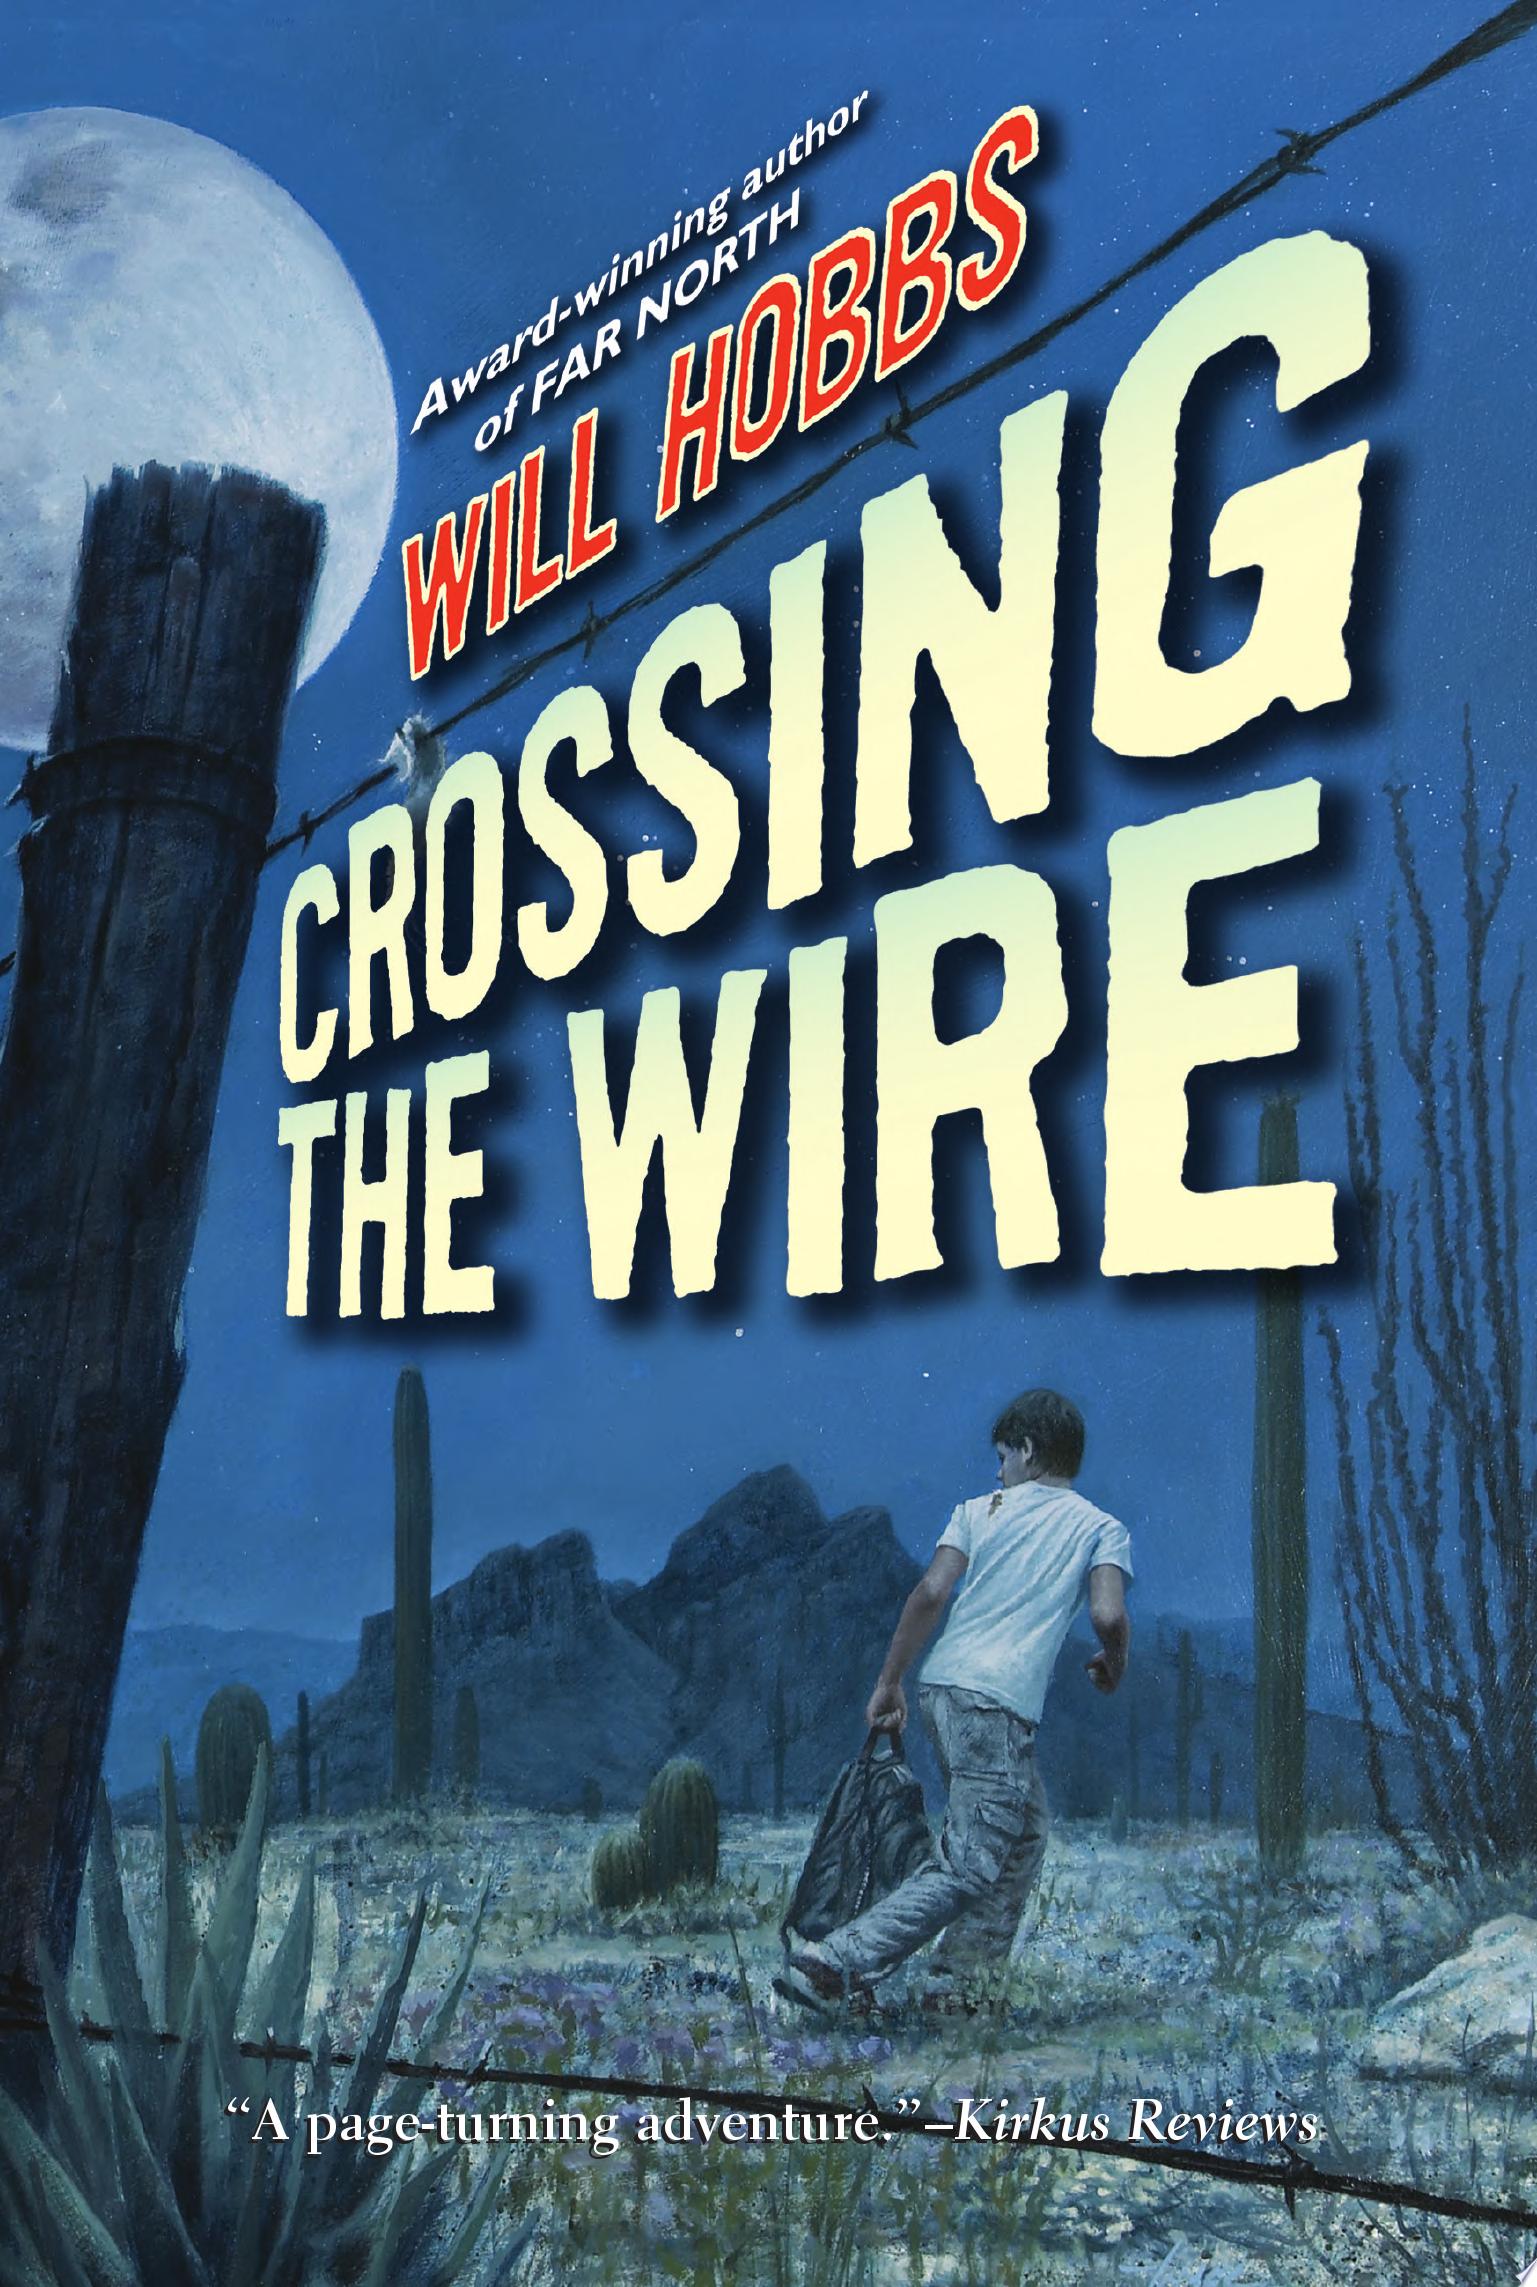 Image for "Crossing the Wire"